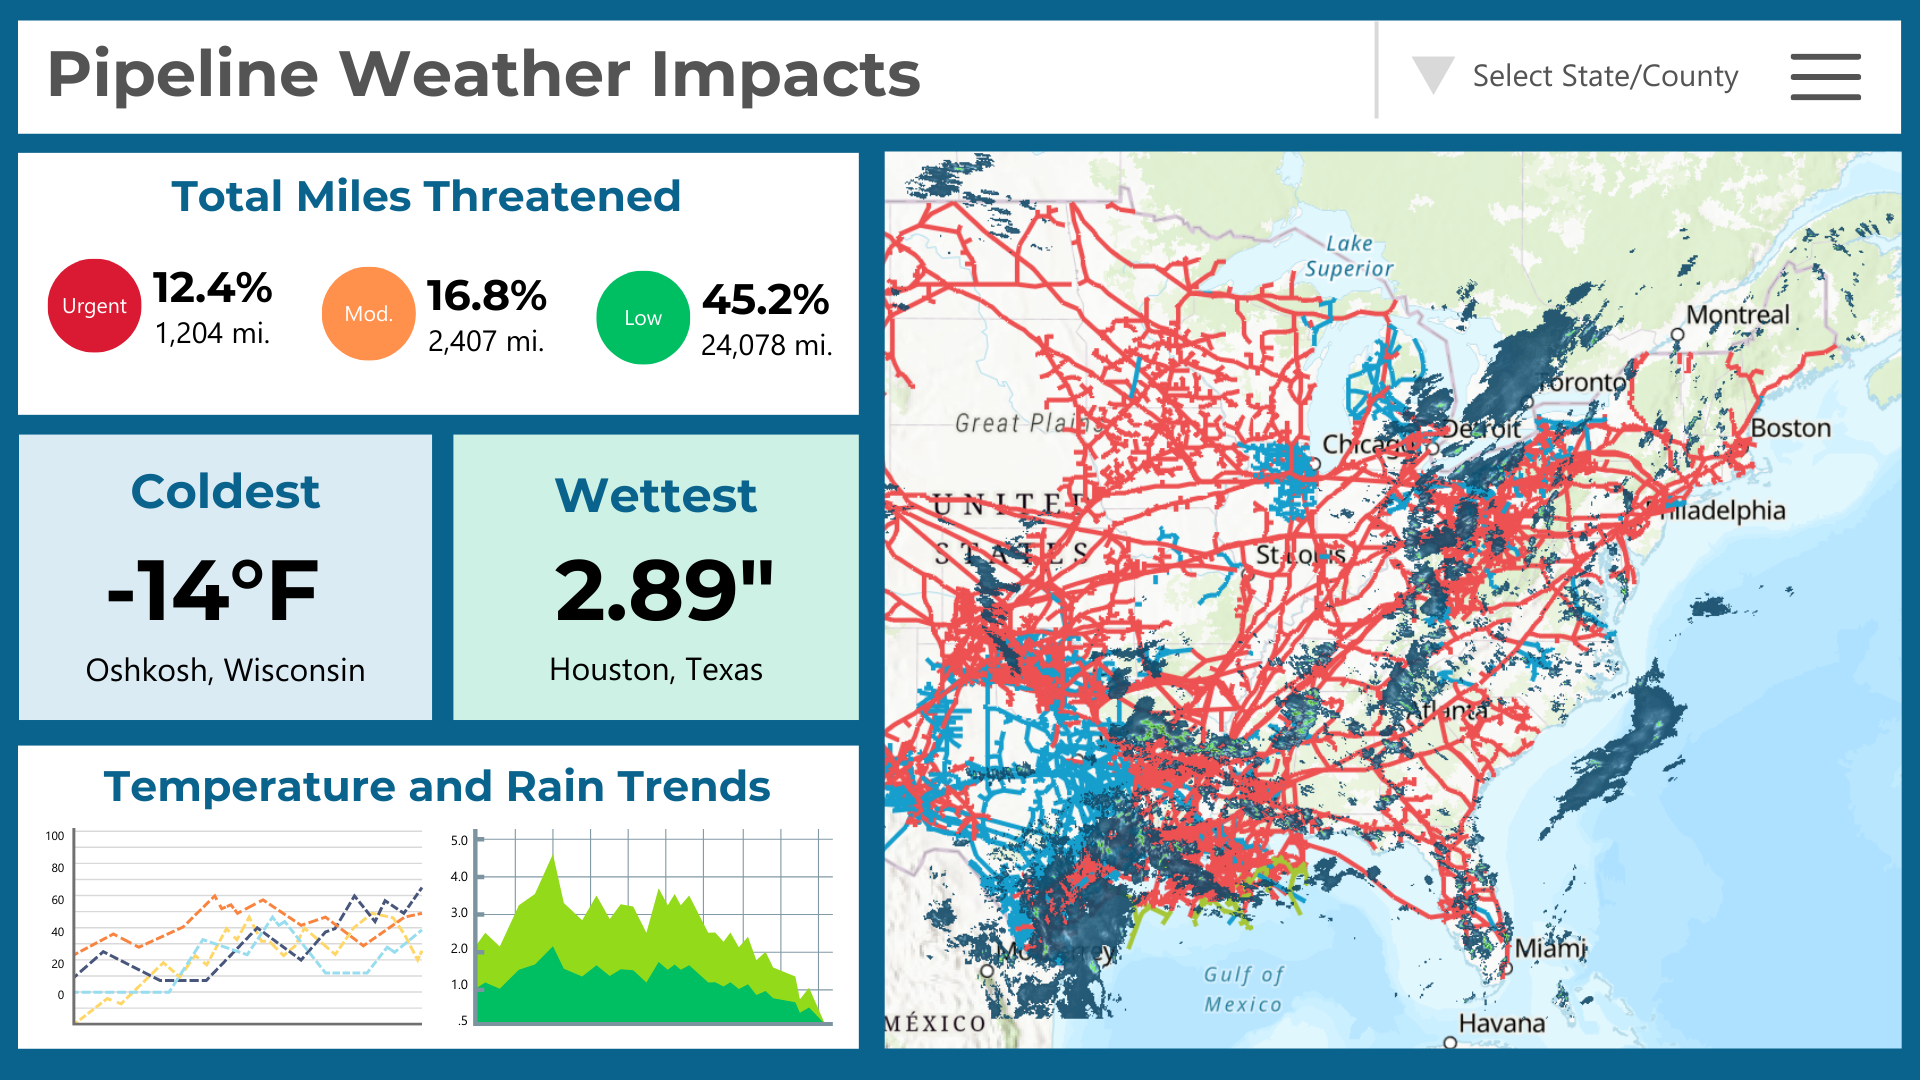 Image of a pipeline weather impacts screenshot